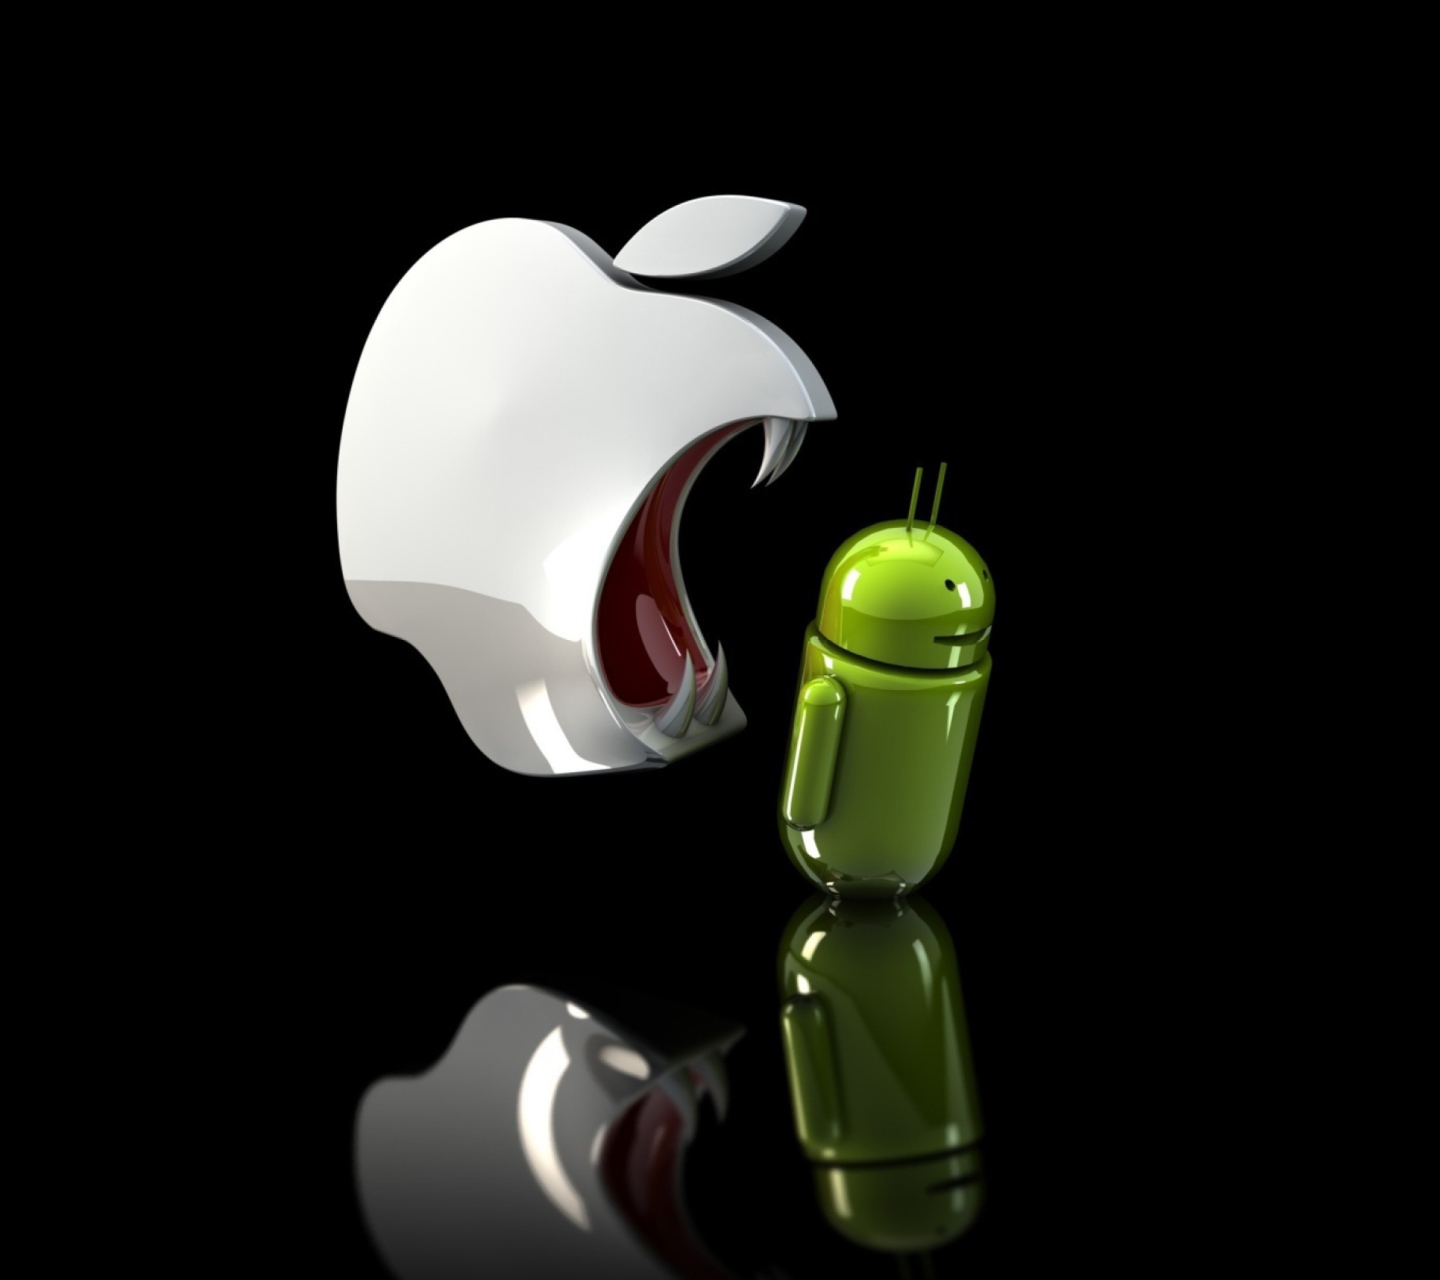 Apple Against Android screenshot #1 1440x1280